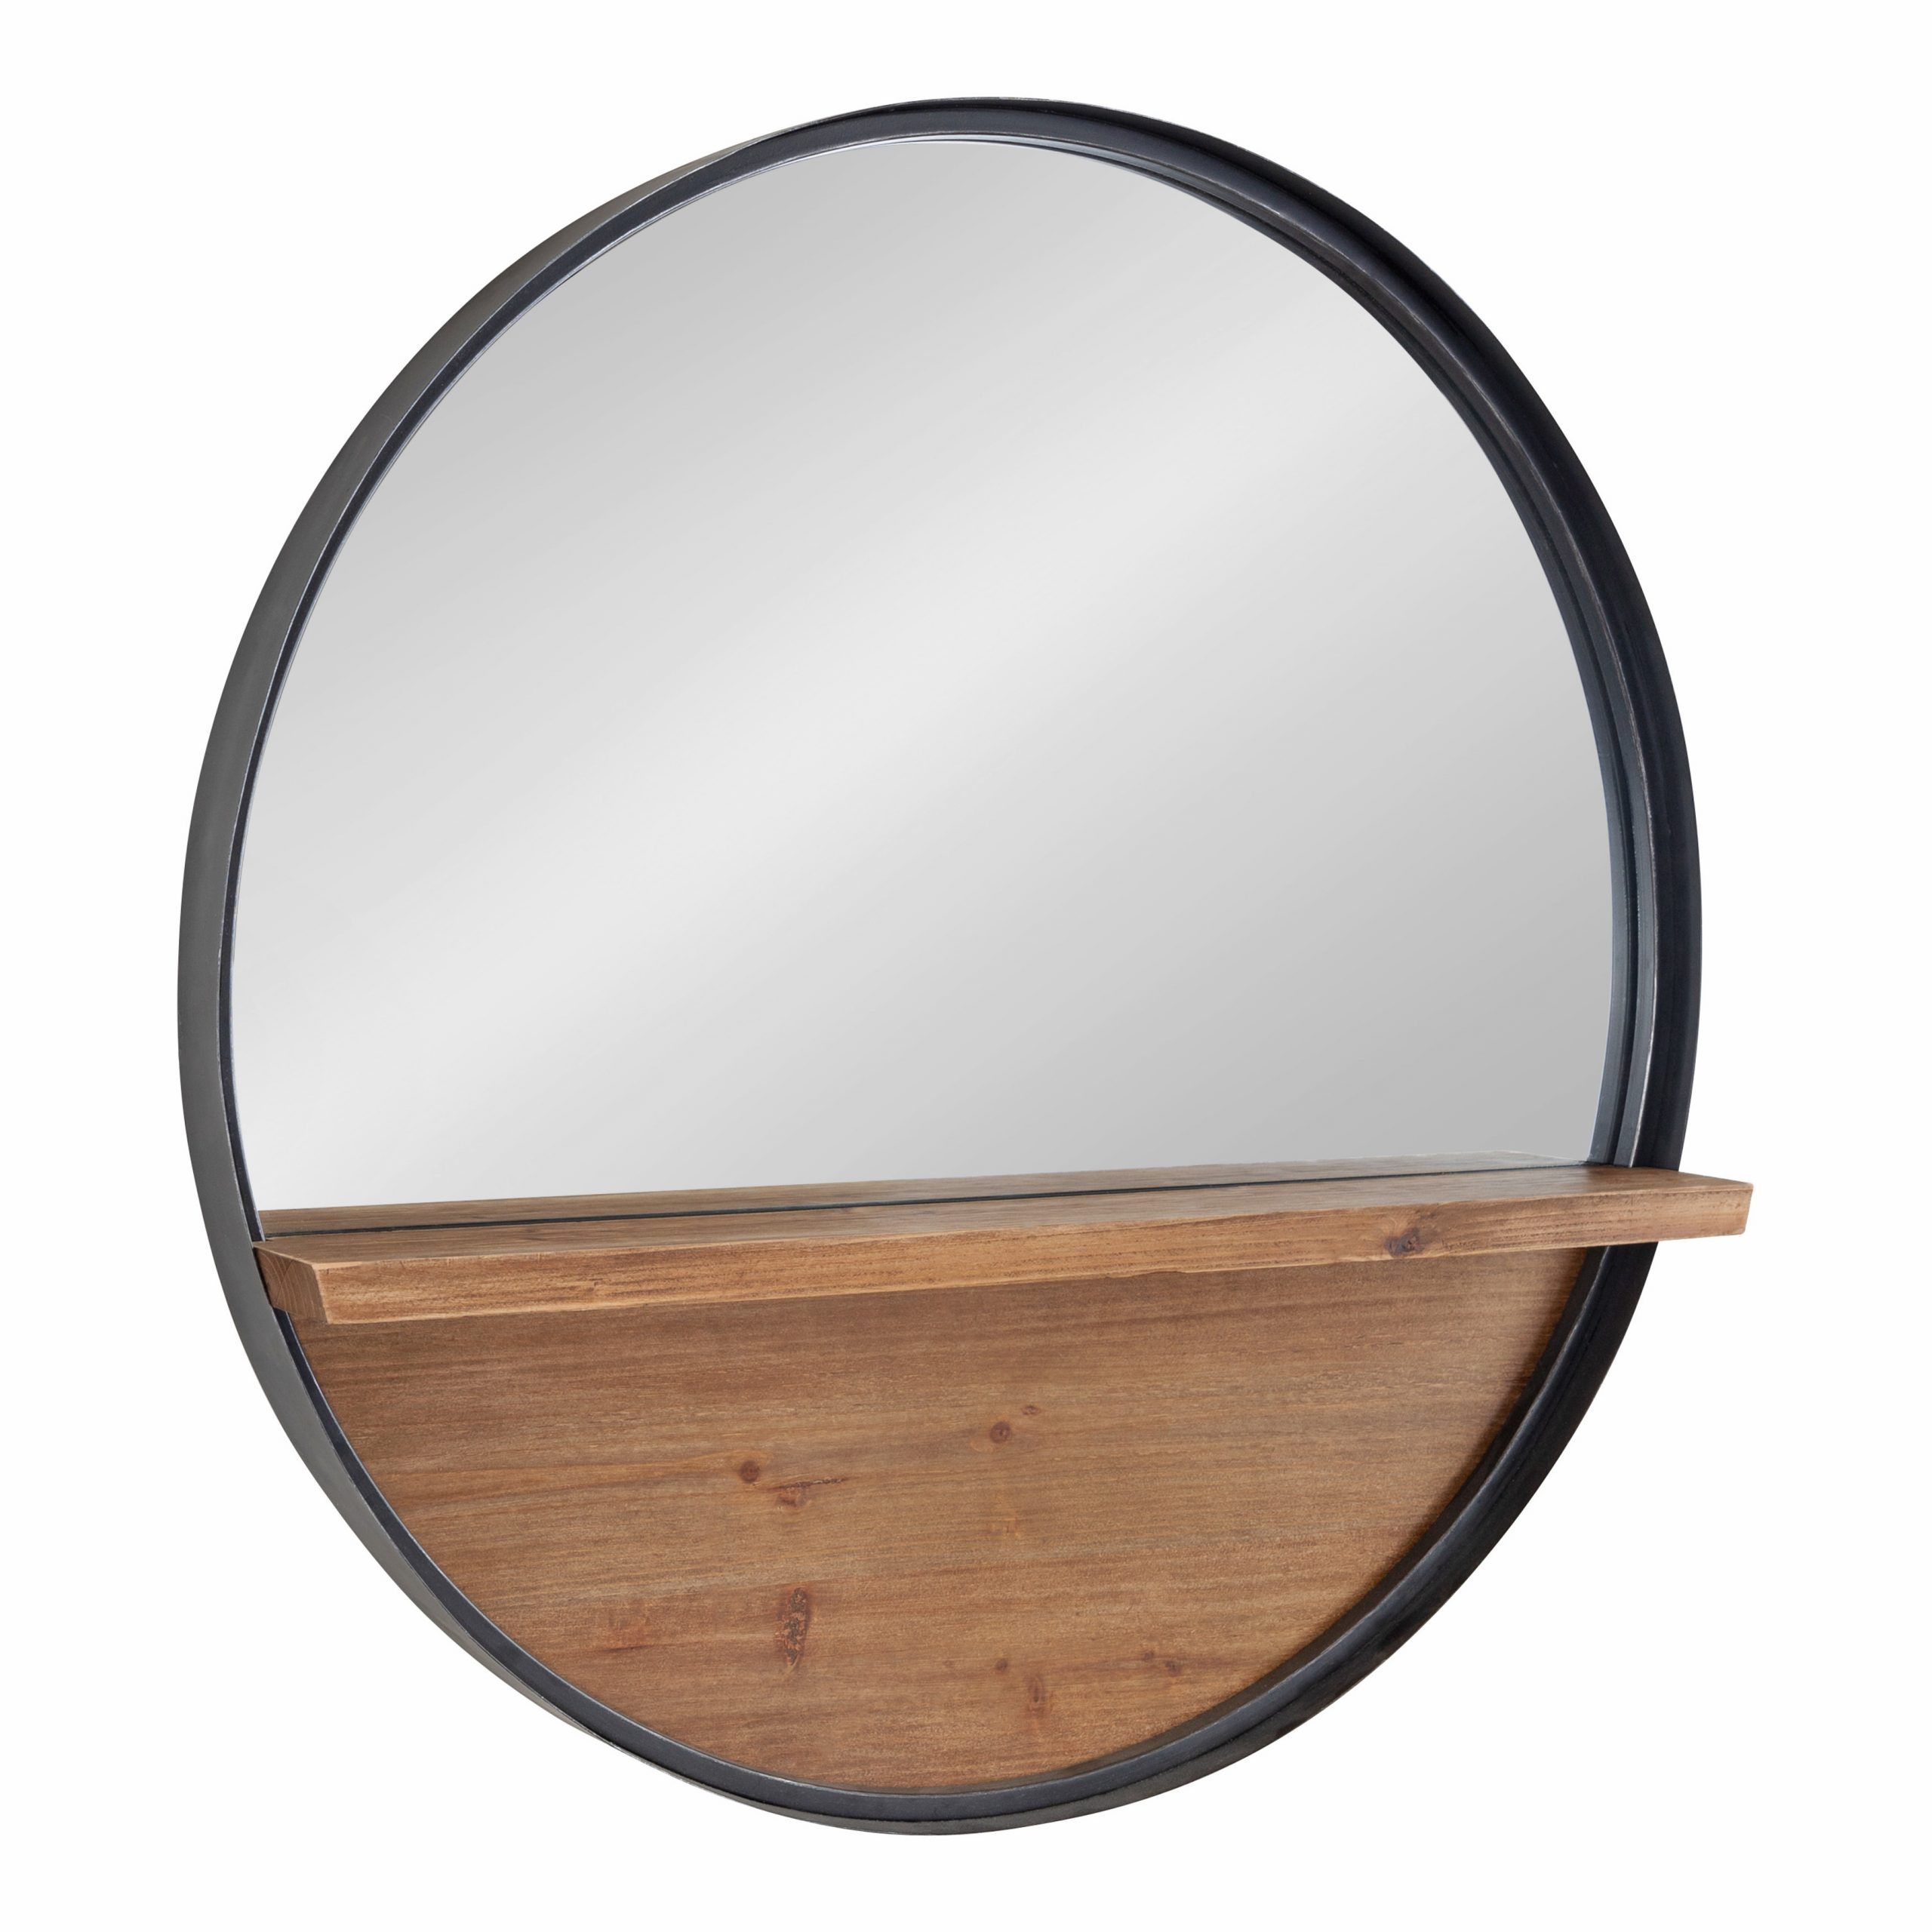 Kate And Laurel Owing Farmhouse Metal Framed Round Mirror With Wood With Regard To Black Round Wall Mirrors (View 6 of 15)